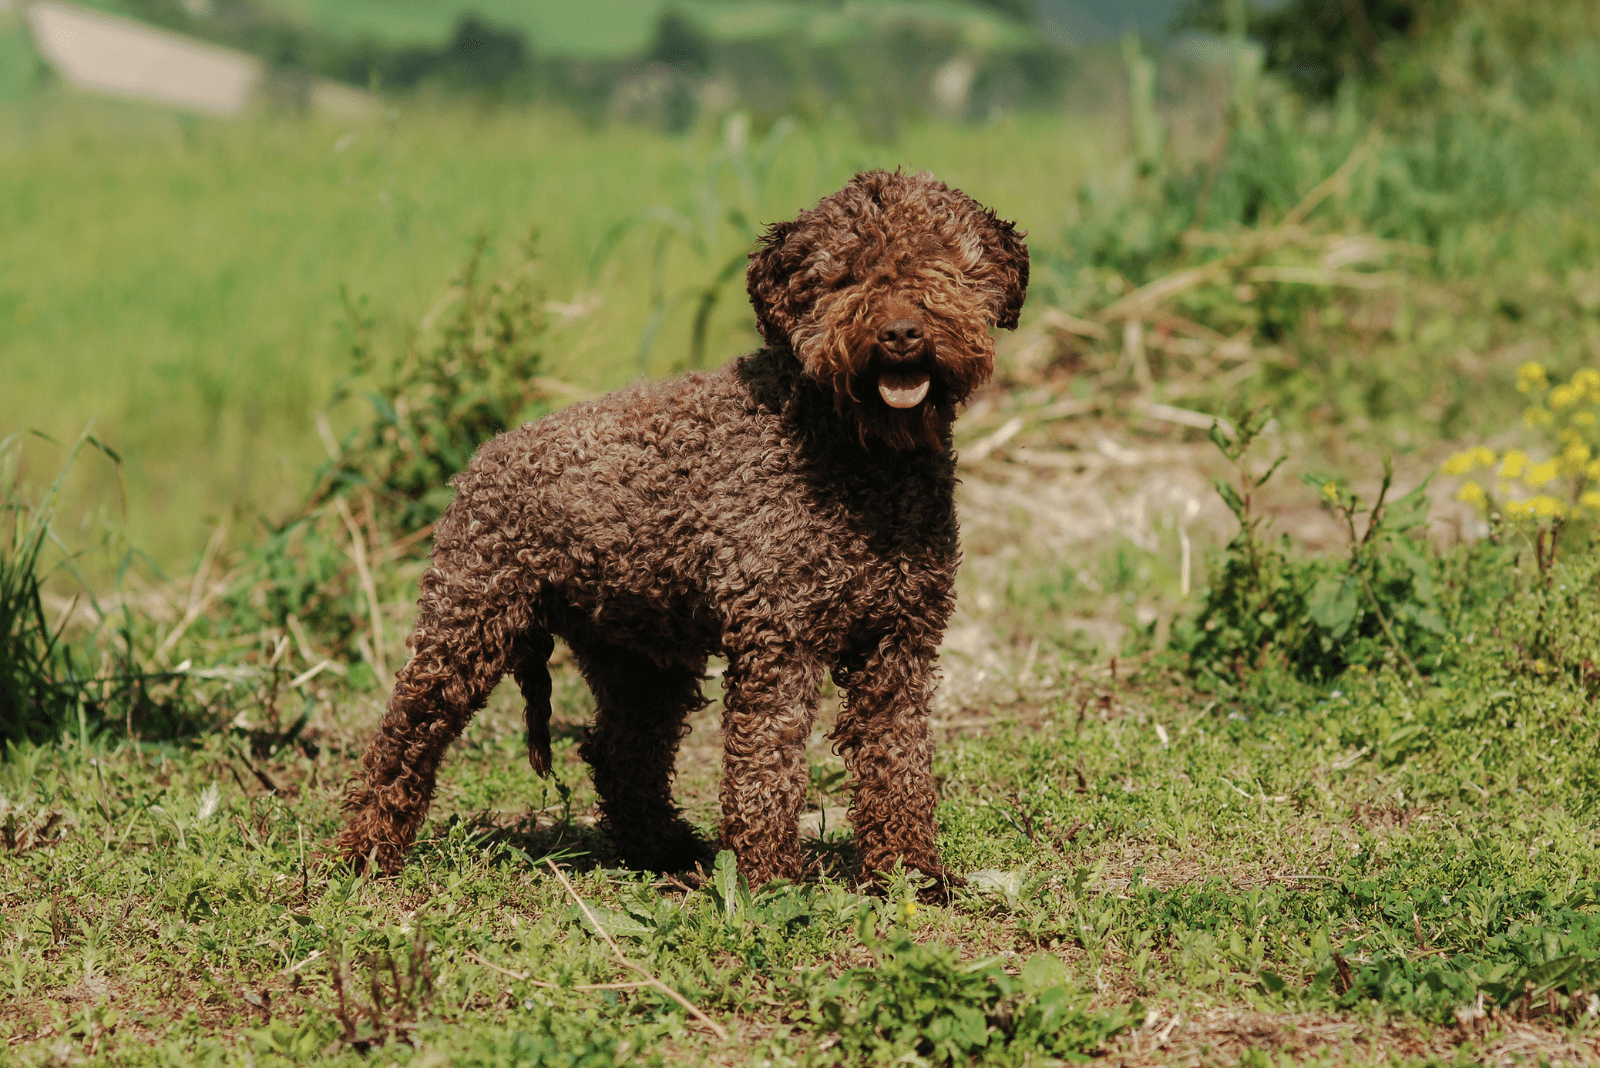 Lagotto Romagnolo stands in a meadow